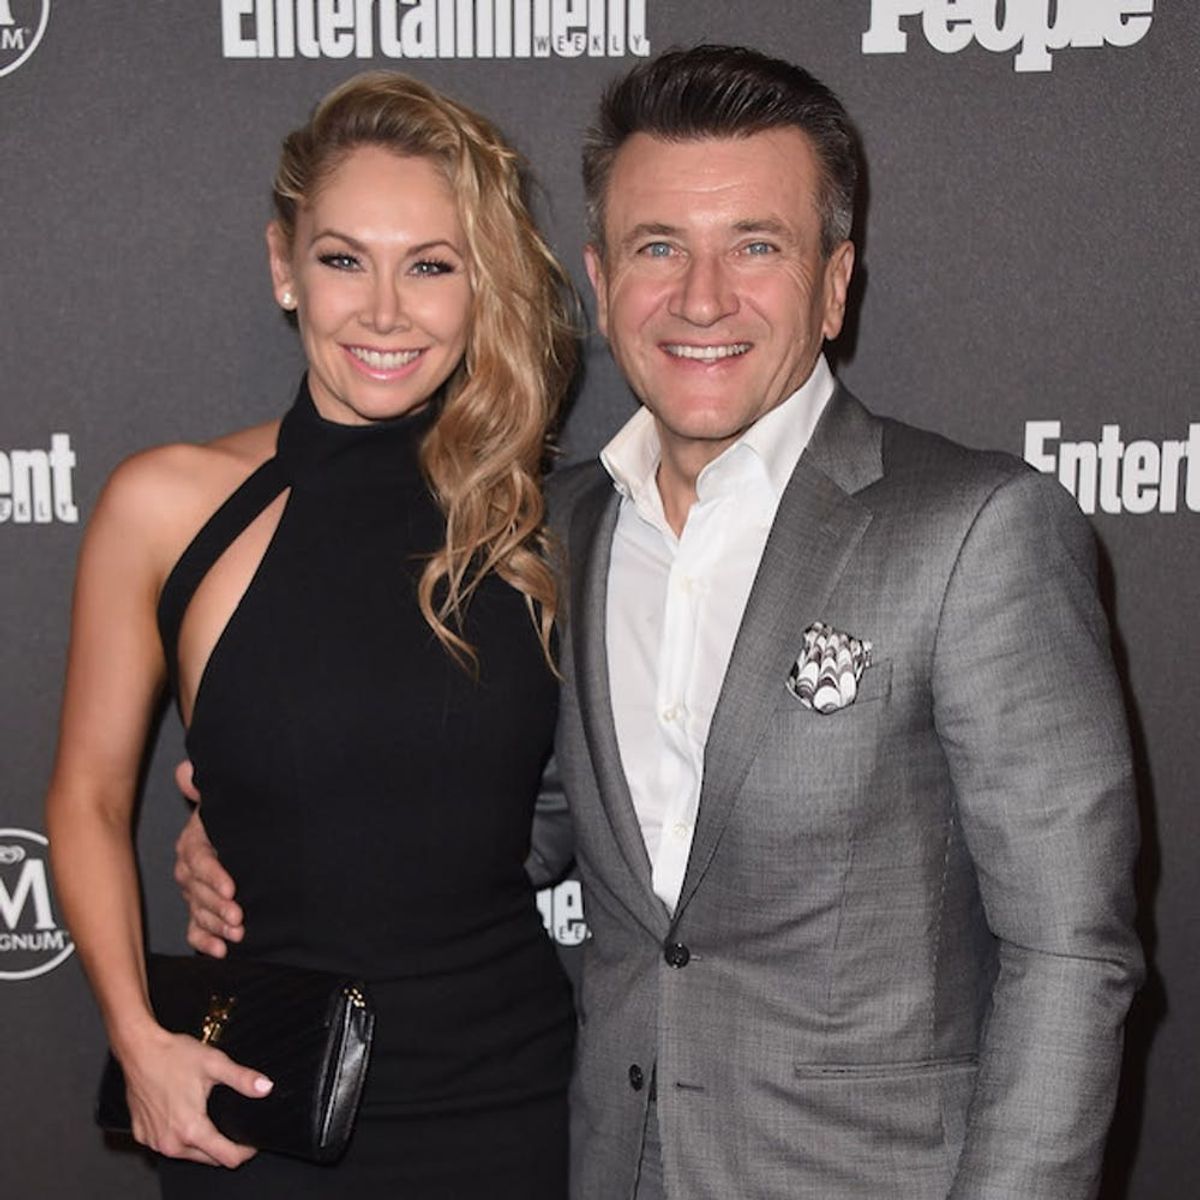 Morning Buzz! Former Dancing With the Stars Partners Kym Johnson and Robert Herjavec Are Married + More